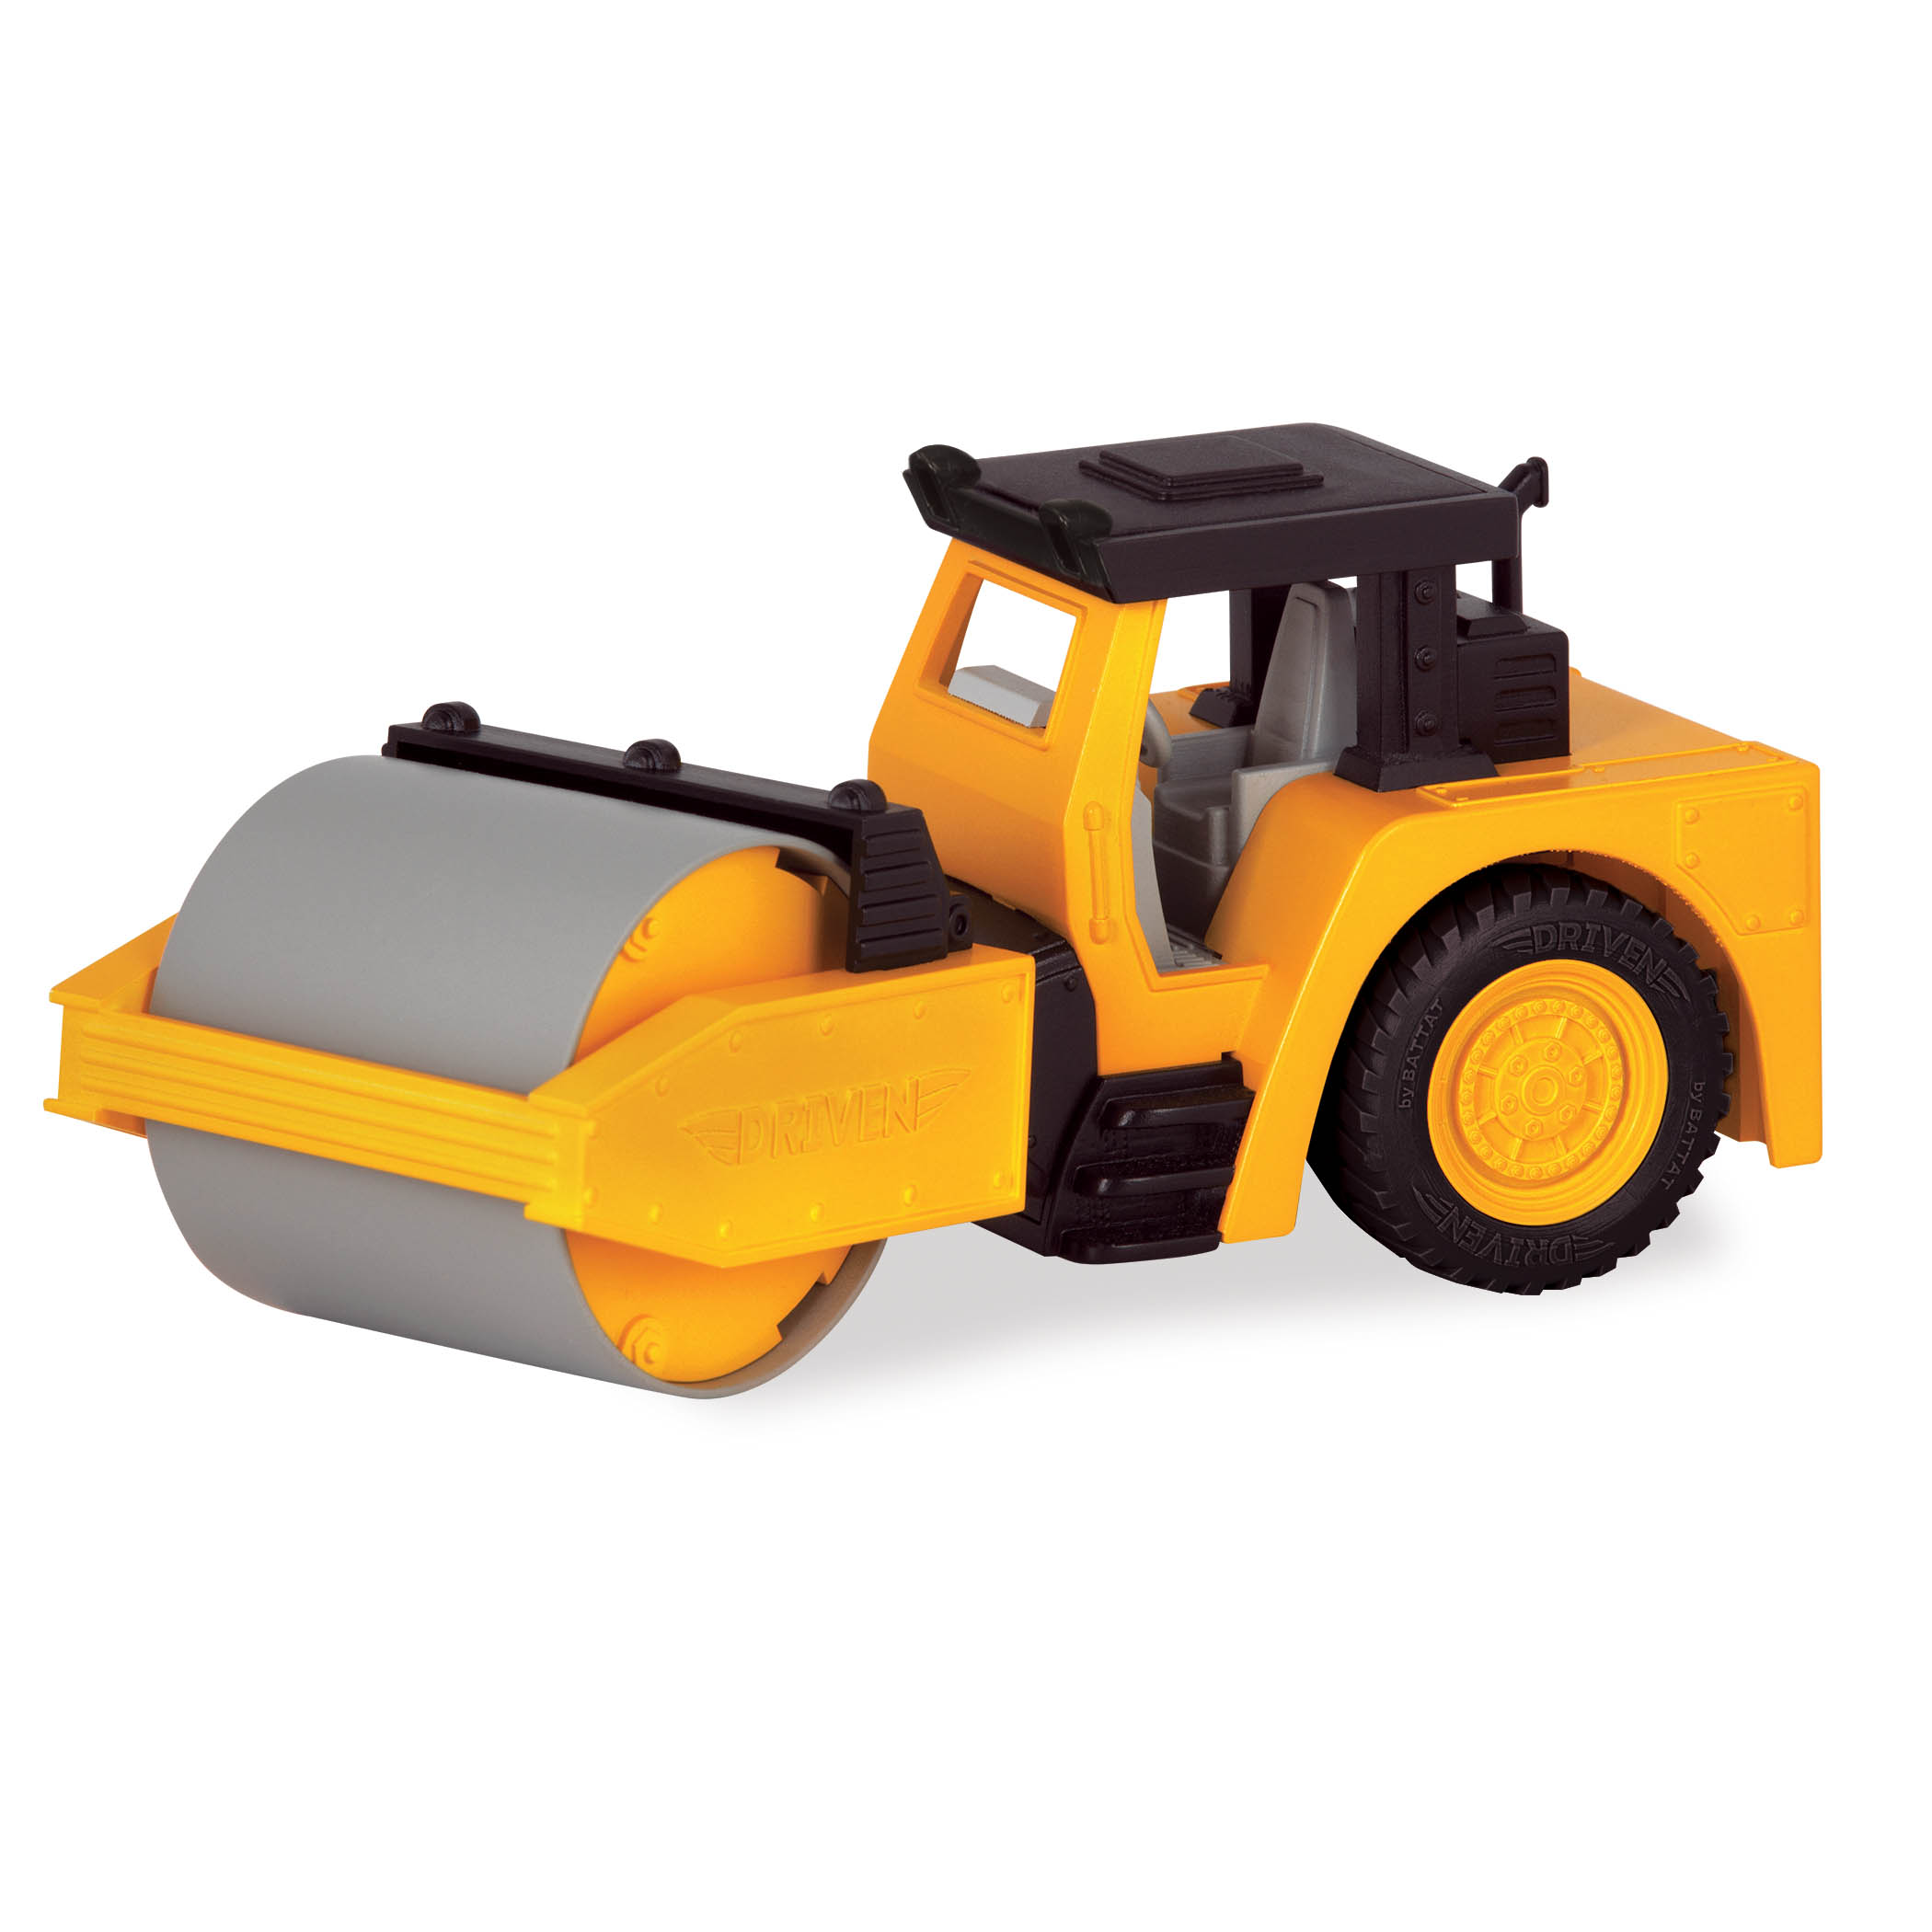 Micro Steam Roller, Small Toy Trucks